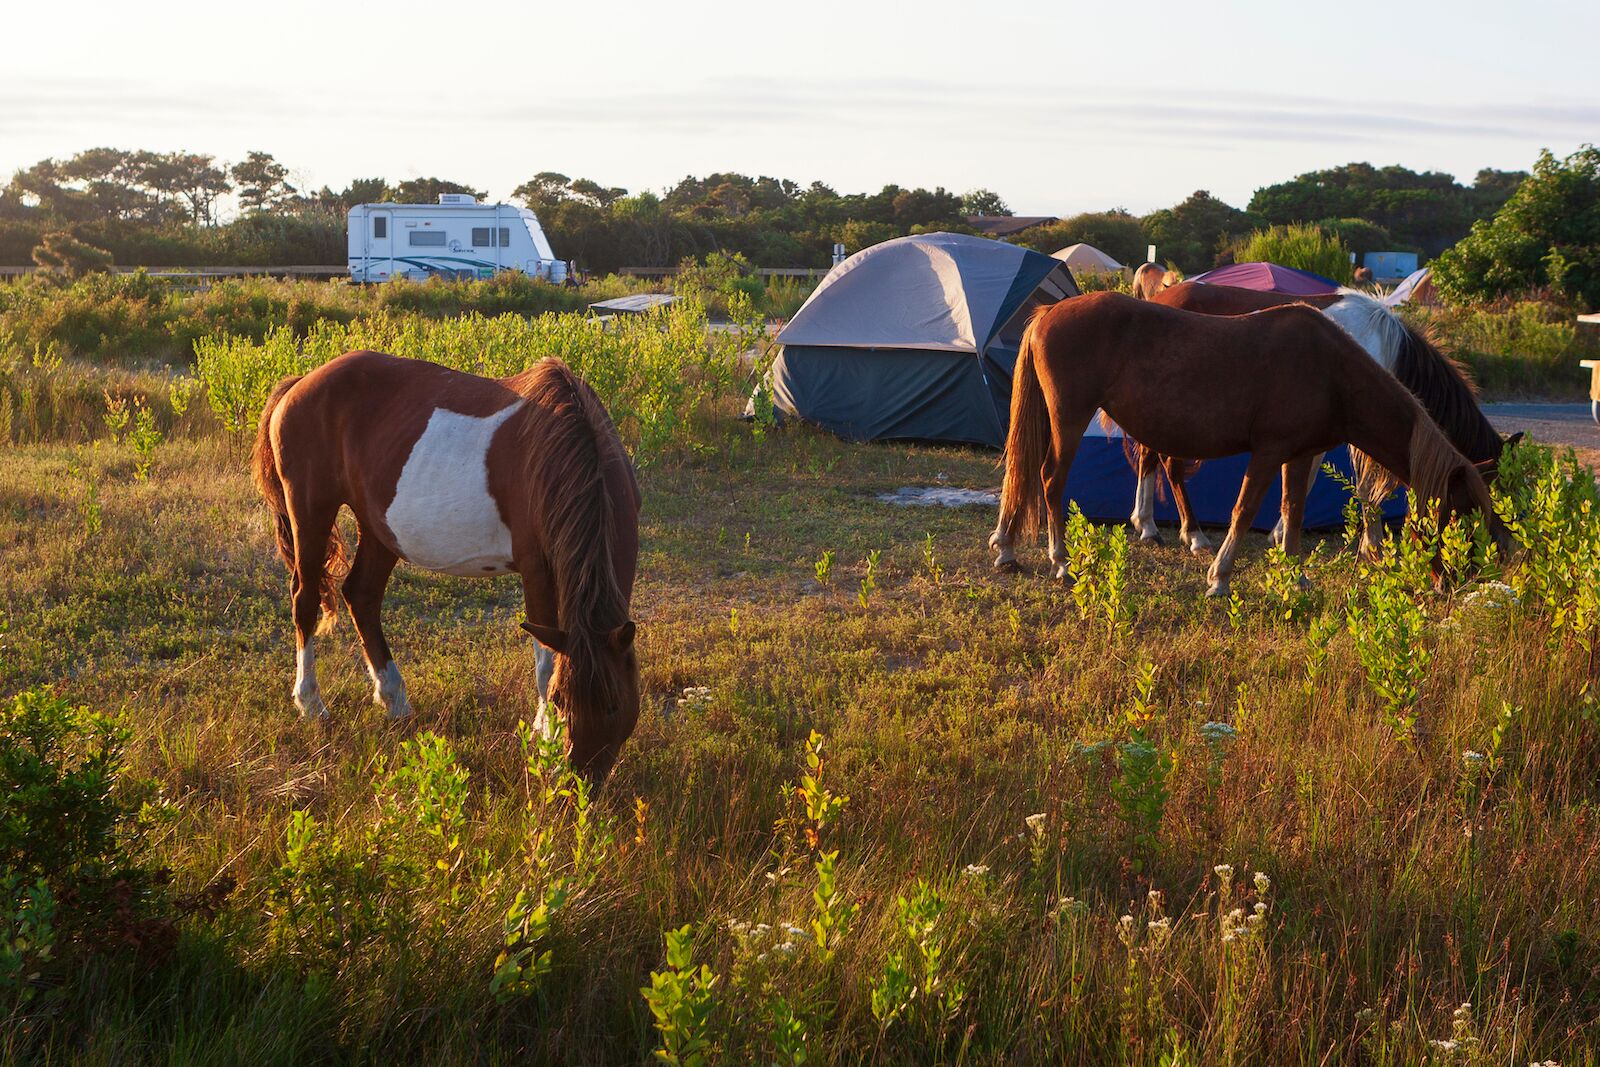 Assateague Island, Maryland, USA - September 01, 2008 Camping on Assateague Island, made famous by the wild horses of maryland, can be romantic, or a nightmare if you leave your food unsecured.